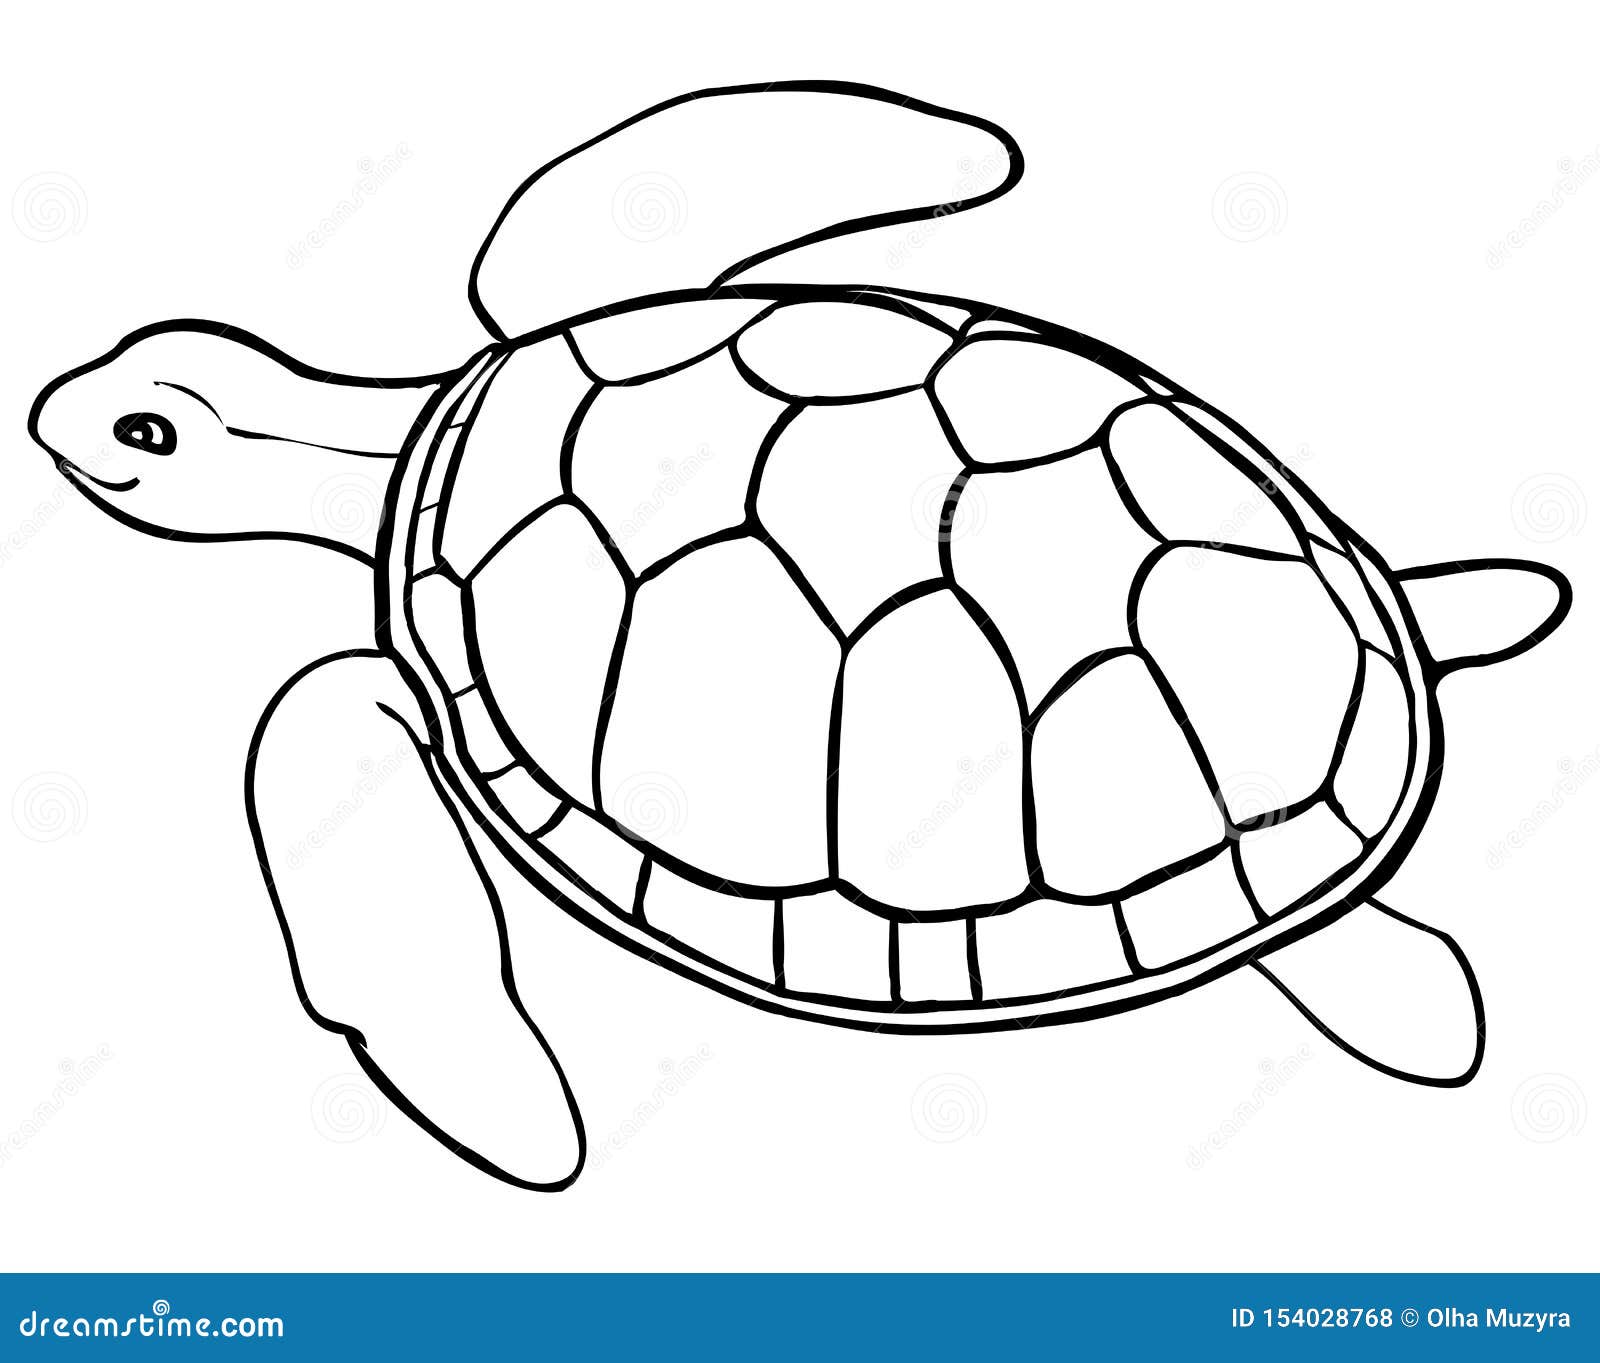 Contour Turtle   Coloring Page for Kids Stock Vector ...